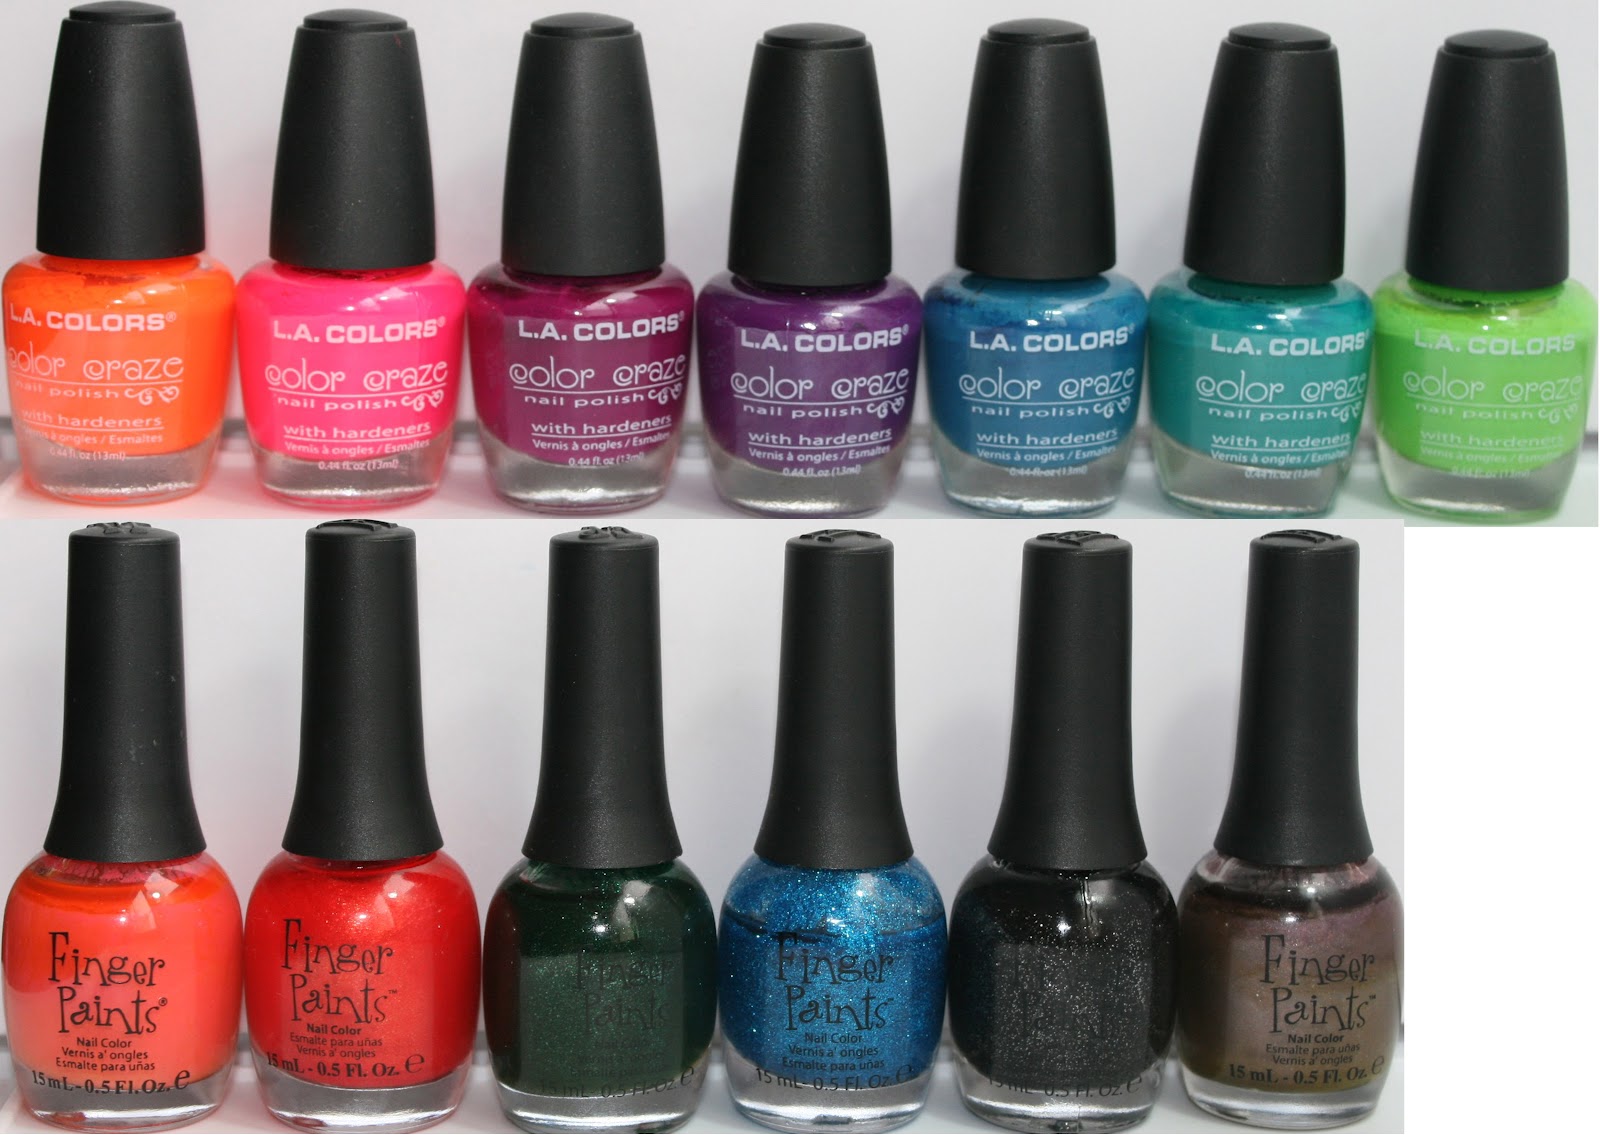 7. Super Nail Glue from L.A. Colors - wide 3